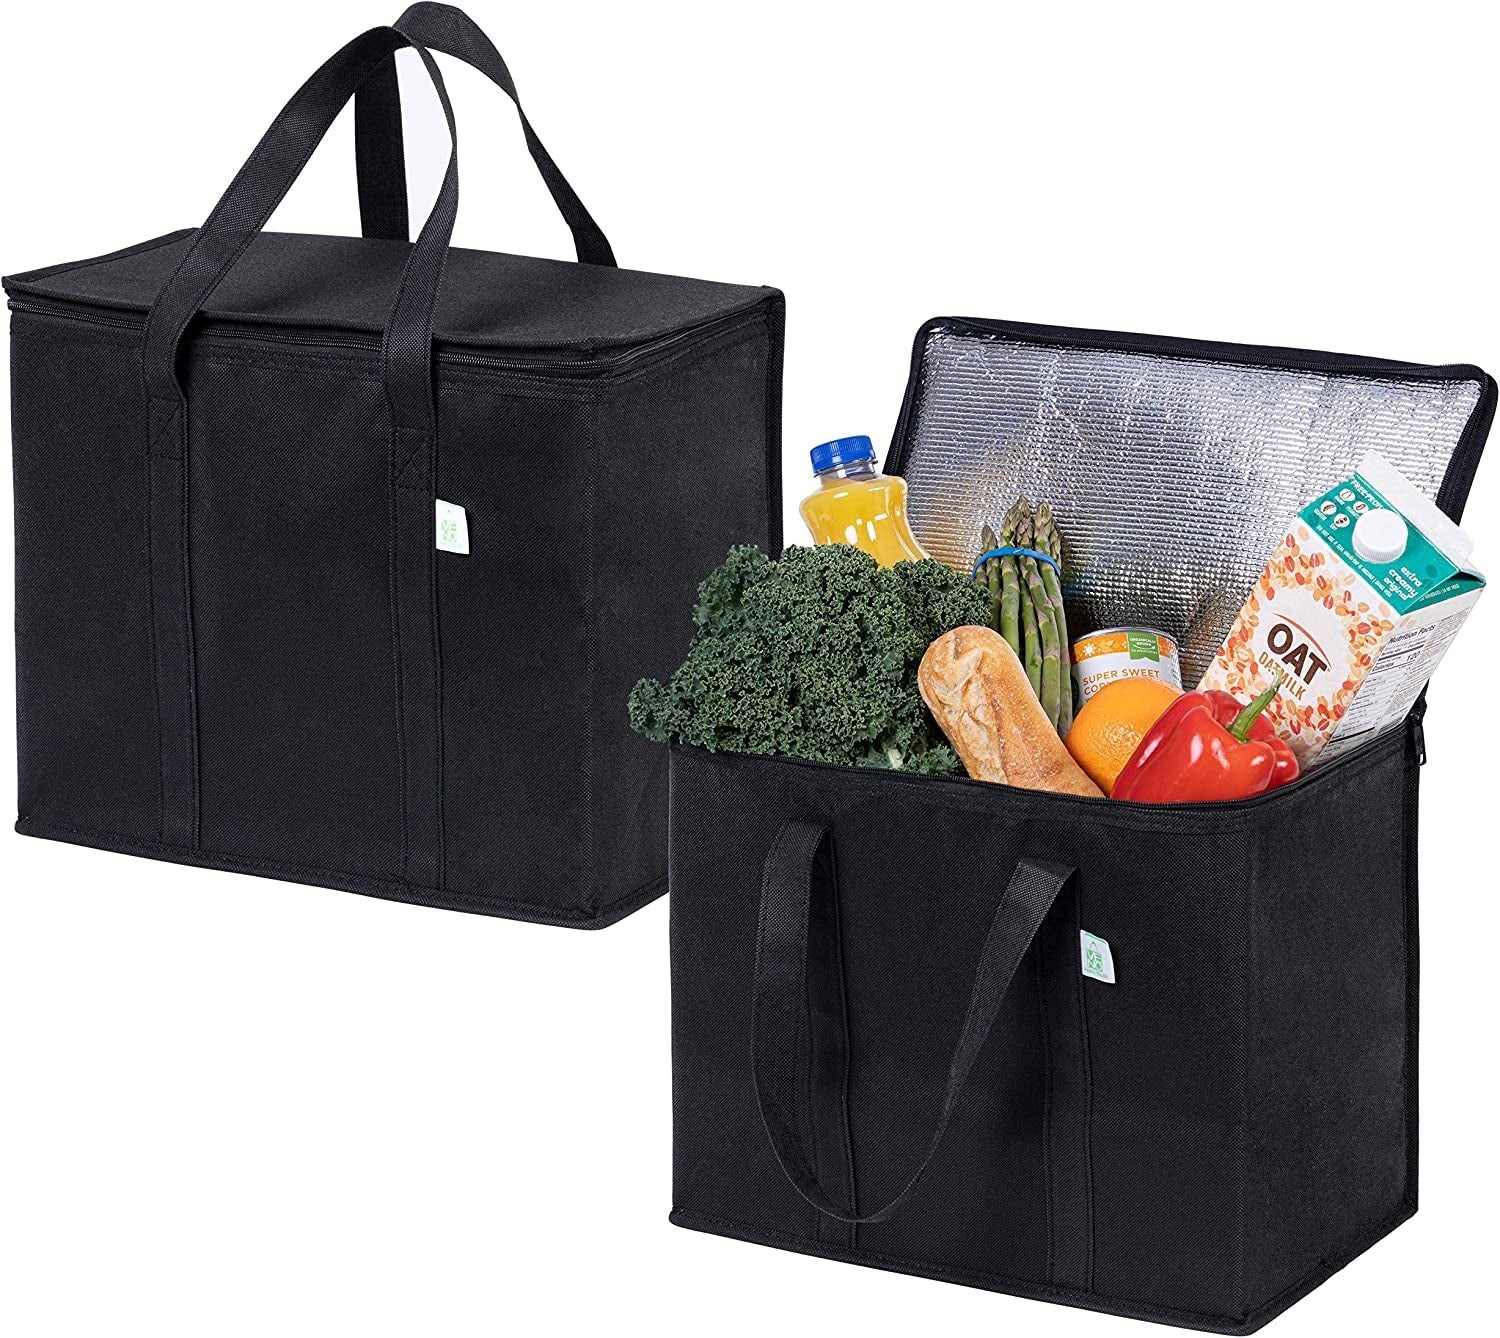 VENO Insulated Reusable Grocery Bag, Food Delivery, Durable, Heavy Duty, Large Size, Stands Upright, Collapsible, Sustainable - FoxMart™️ - VENO BAG